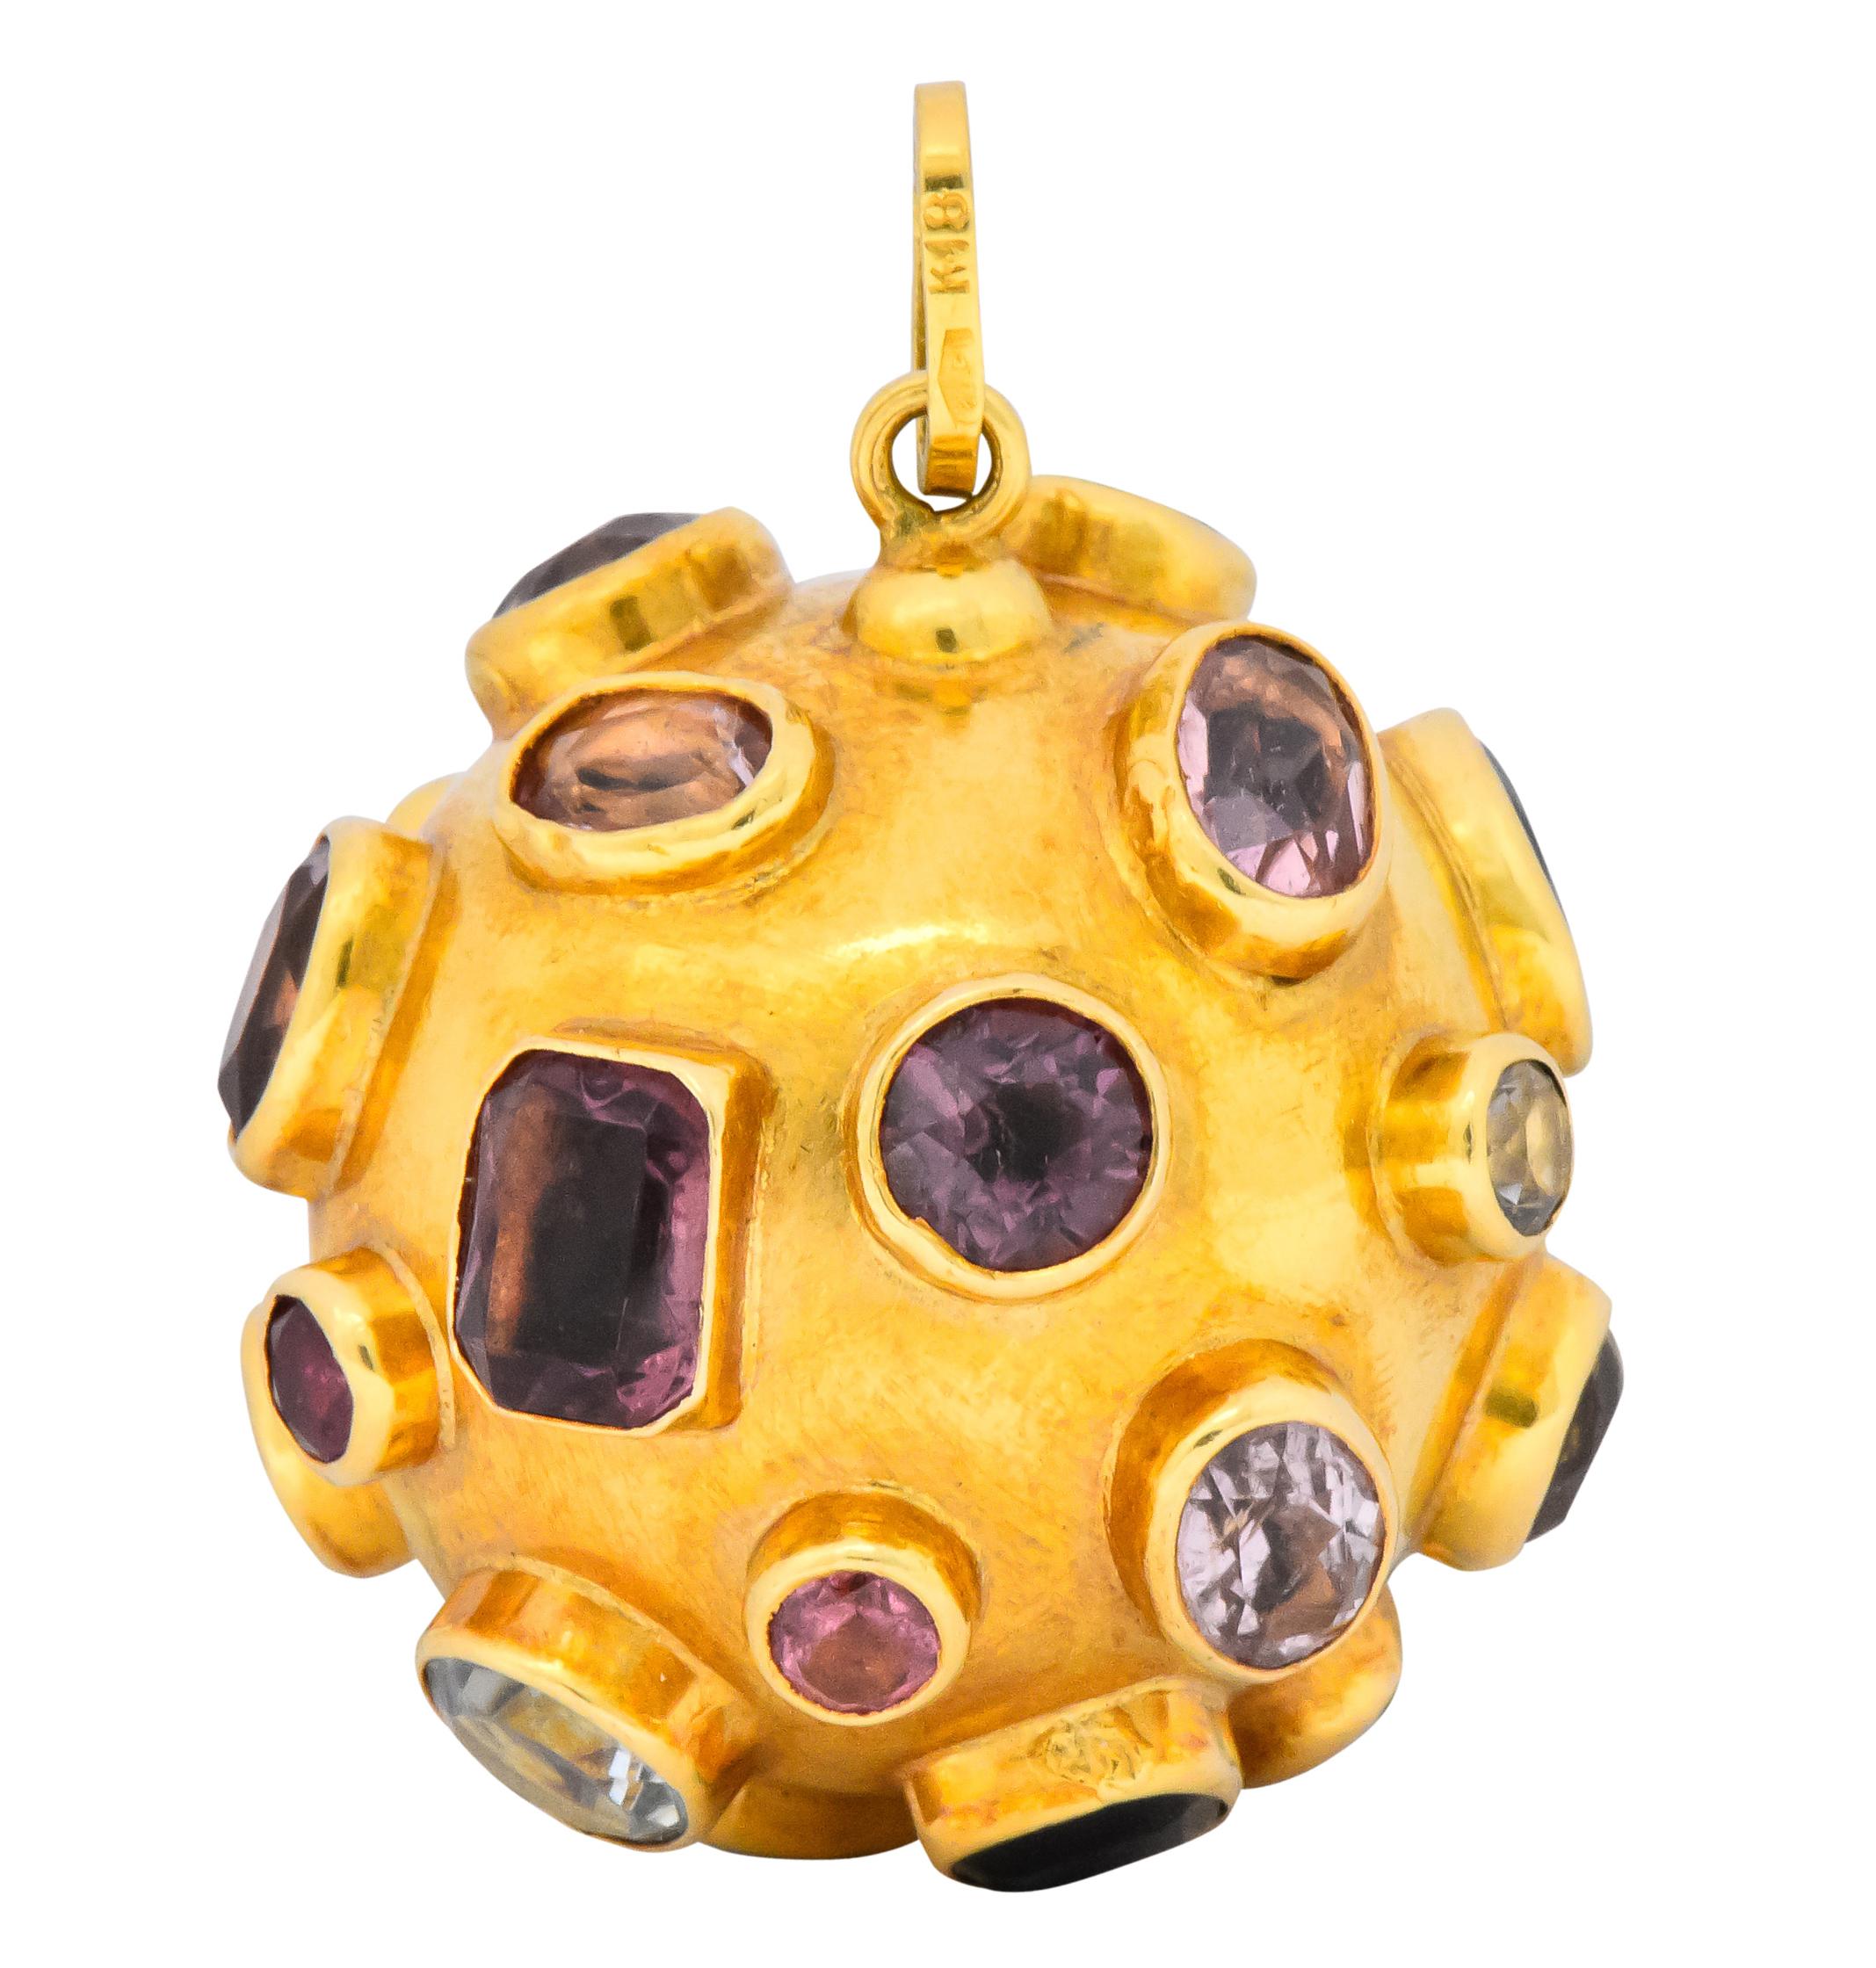 Designed as a hollow polished gold sphere with bezel set gemstones throughout

Including amethyst, citrine, tourmaline, topaz, sapphire, aquamarine and tanzanite

Of varying cuts, shapes and colors

Stamped 18K

Diameter: Approx. 1 1/4 Inches

Total